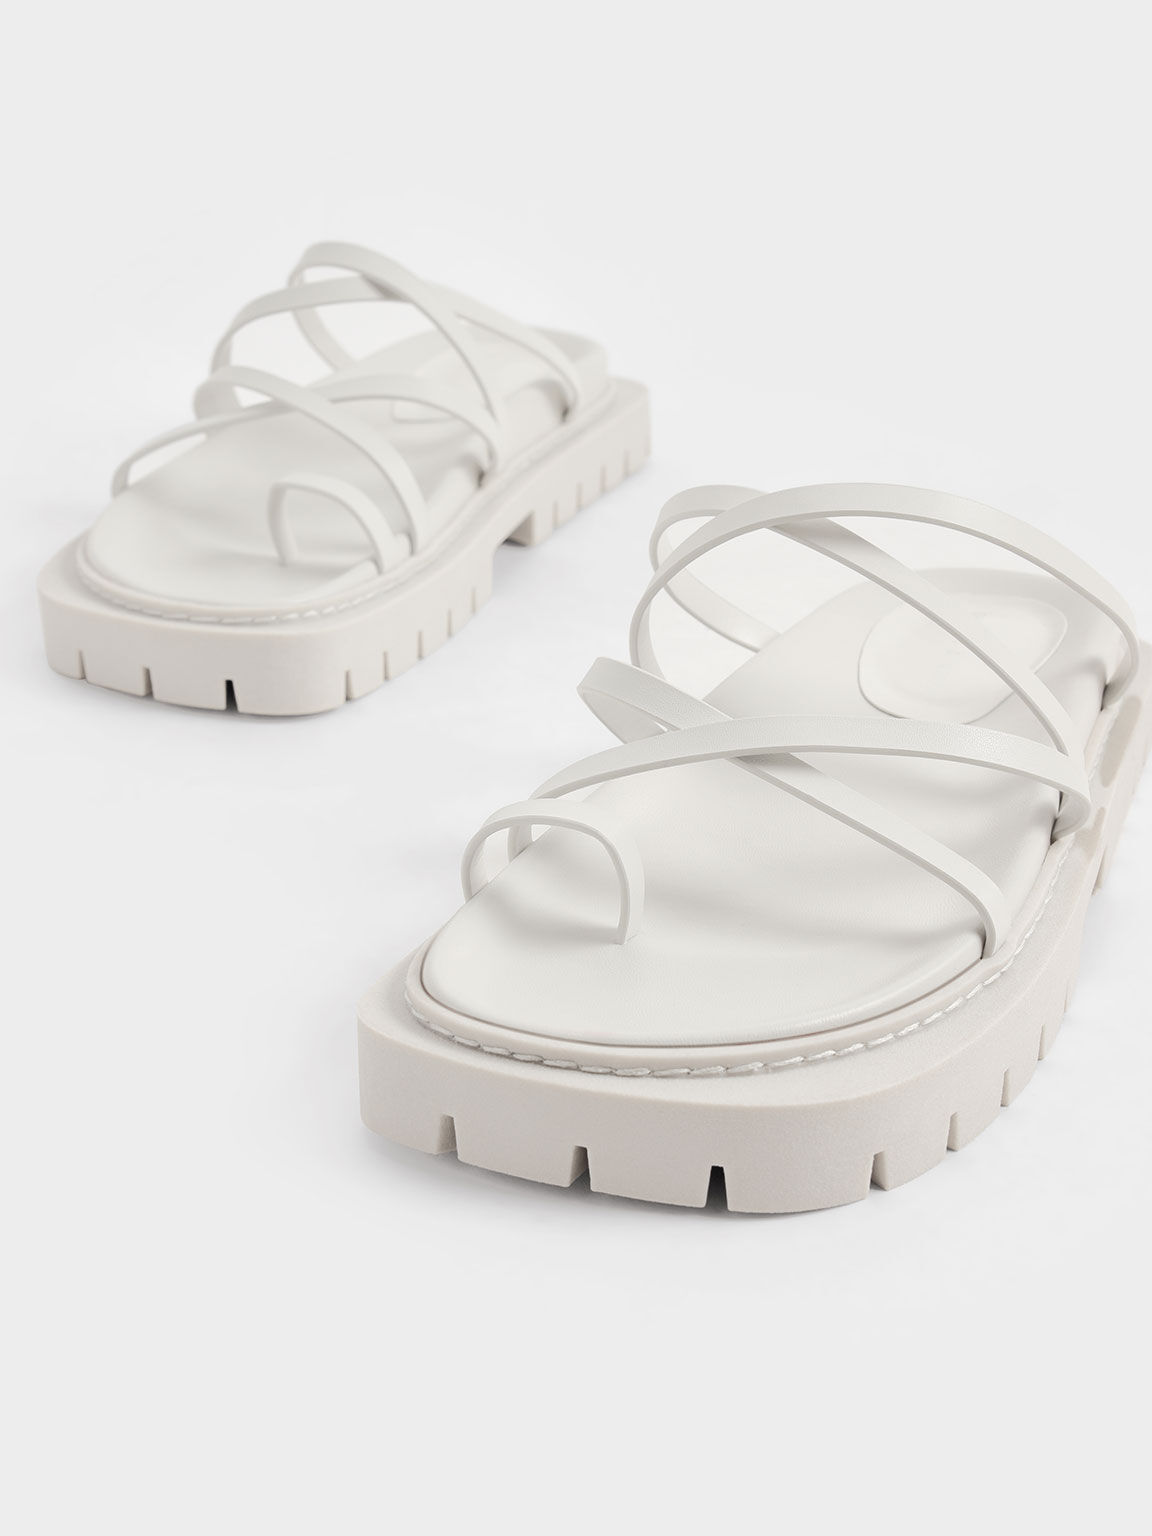 Sandal Strappy Cleated Sole, White, hi-res